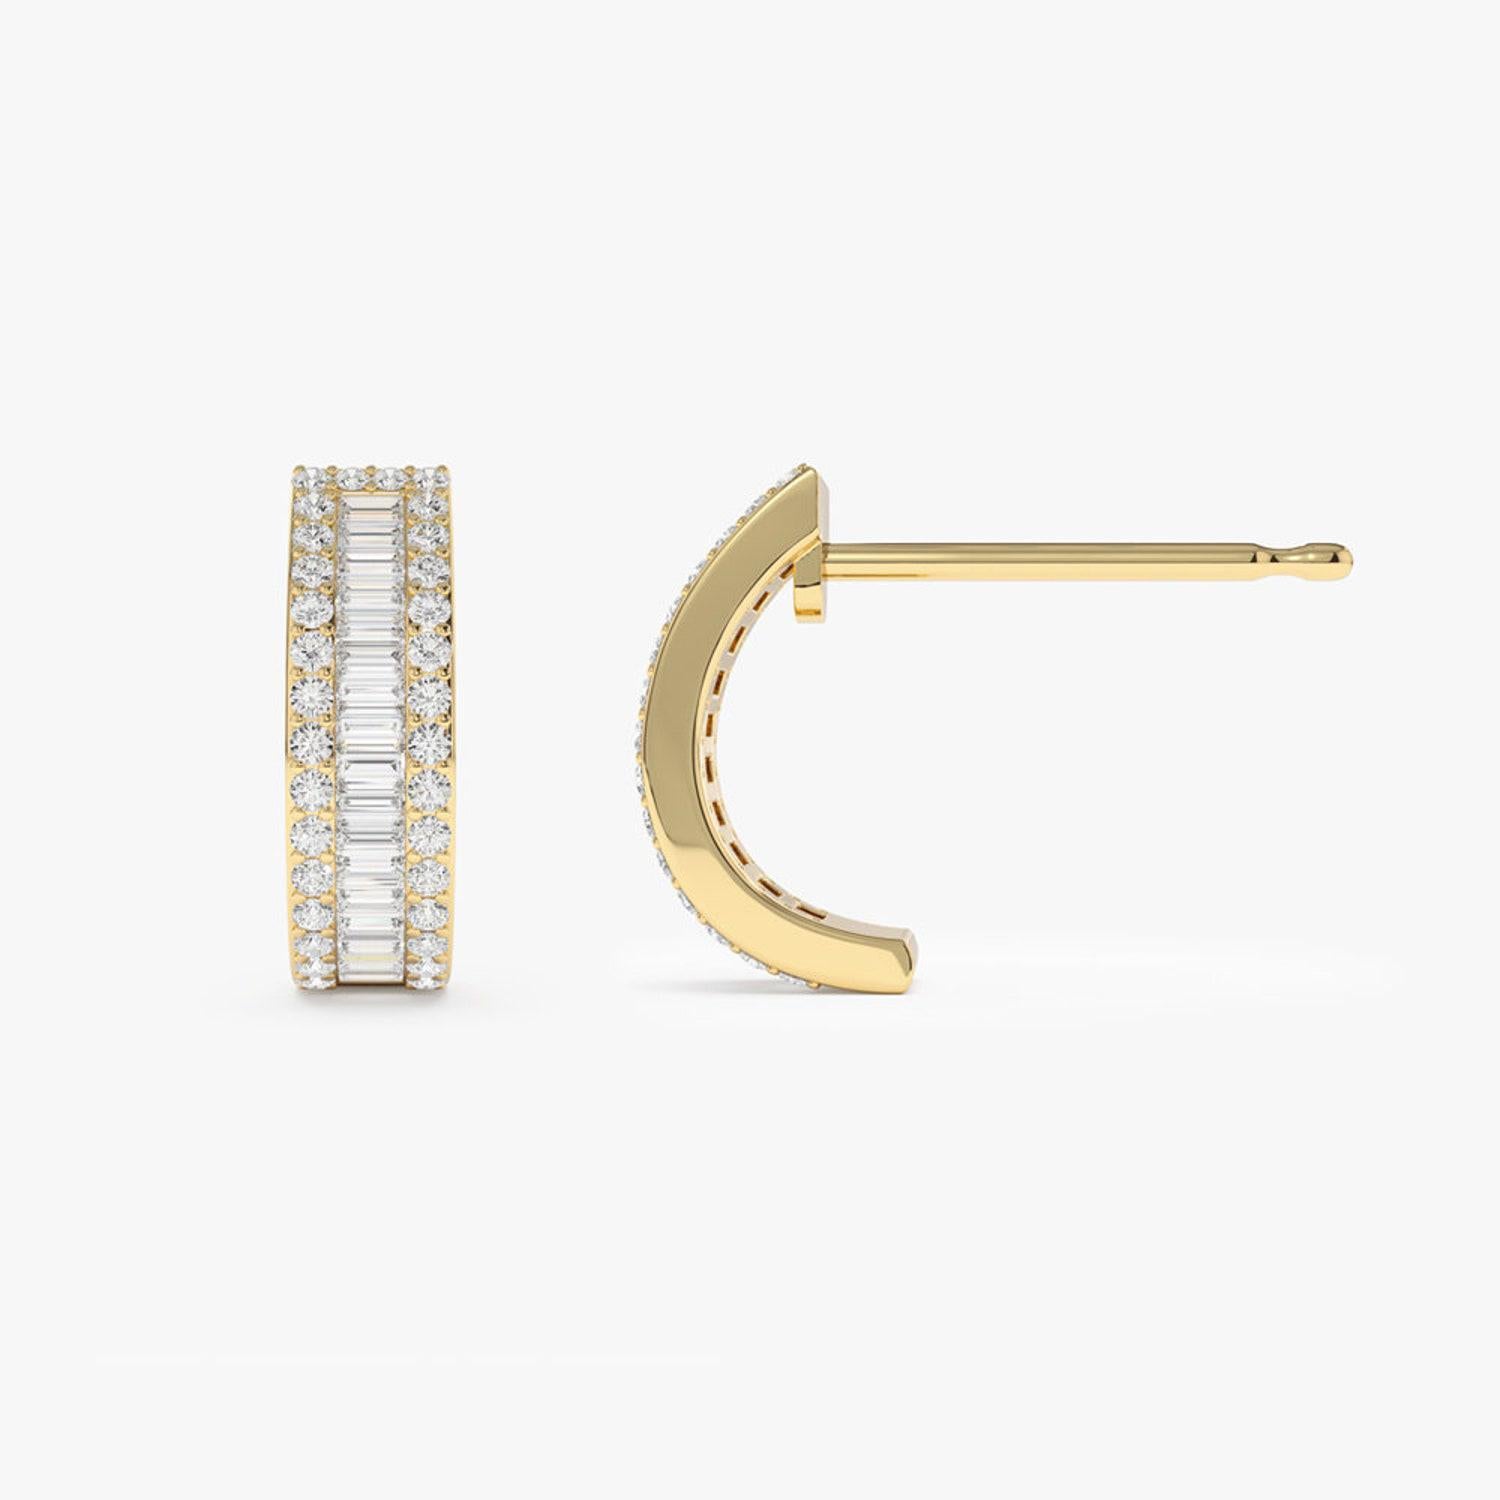 Modern Diamond Earrings / 14k Gold Baguette and Round Diamond Micro Pave Earrings For Sale